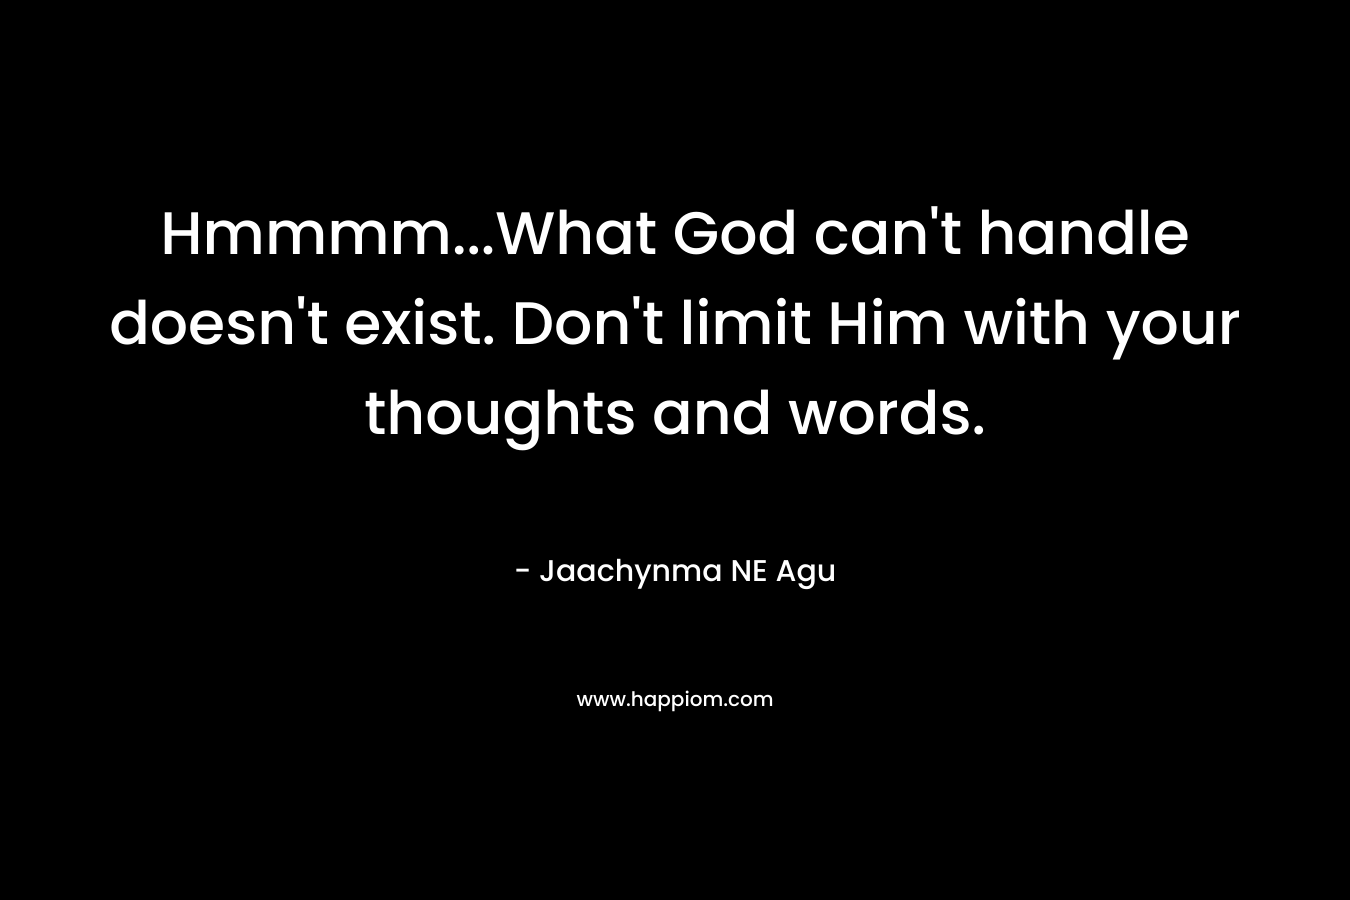 Hmmmm…What God can’t handle doesn’t exist. Don’t limit Him with your thoughts and words. – Jaachynma NE Agu